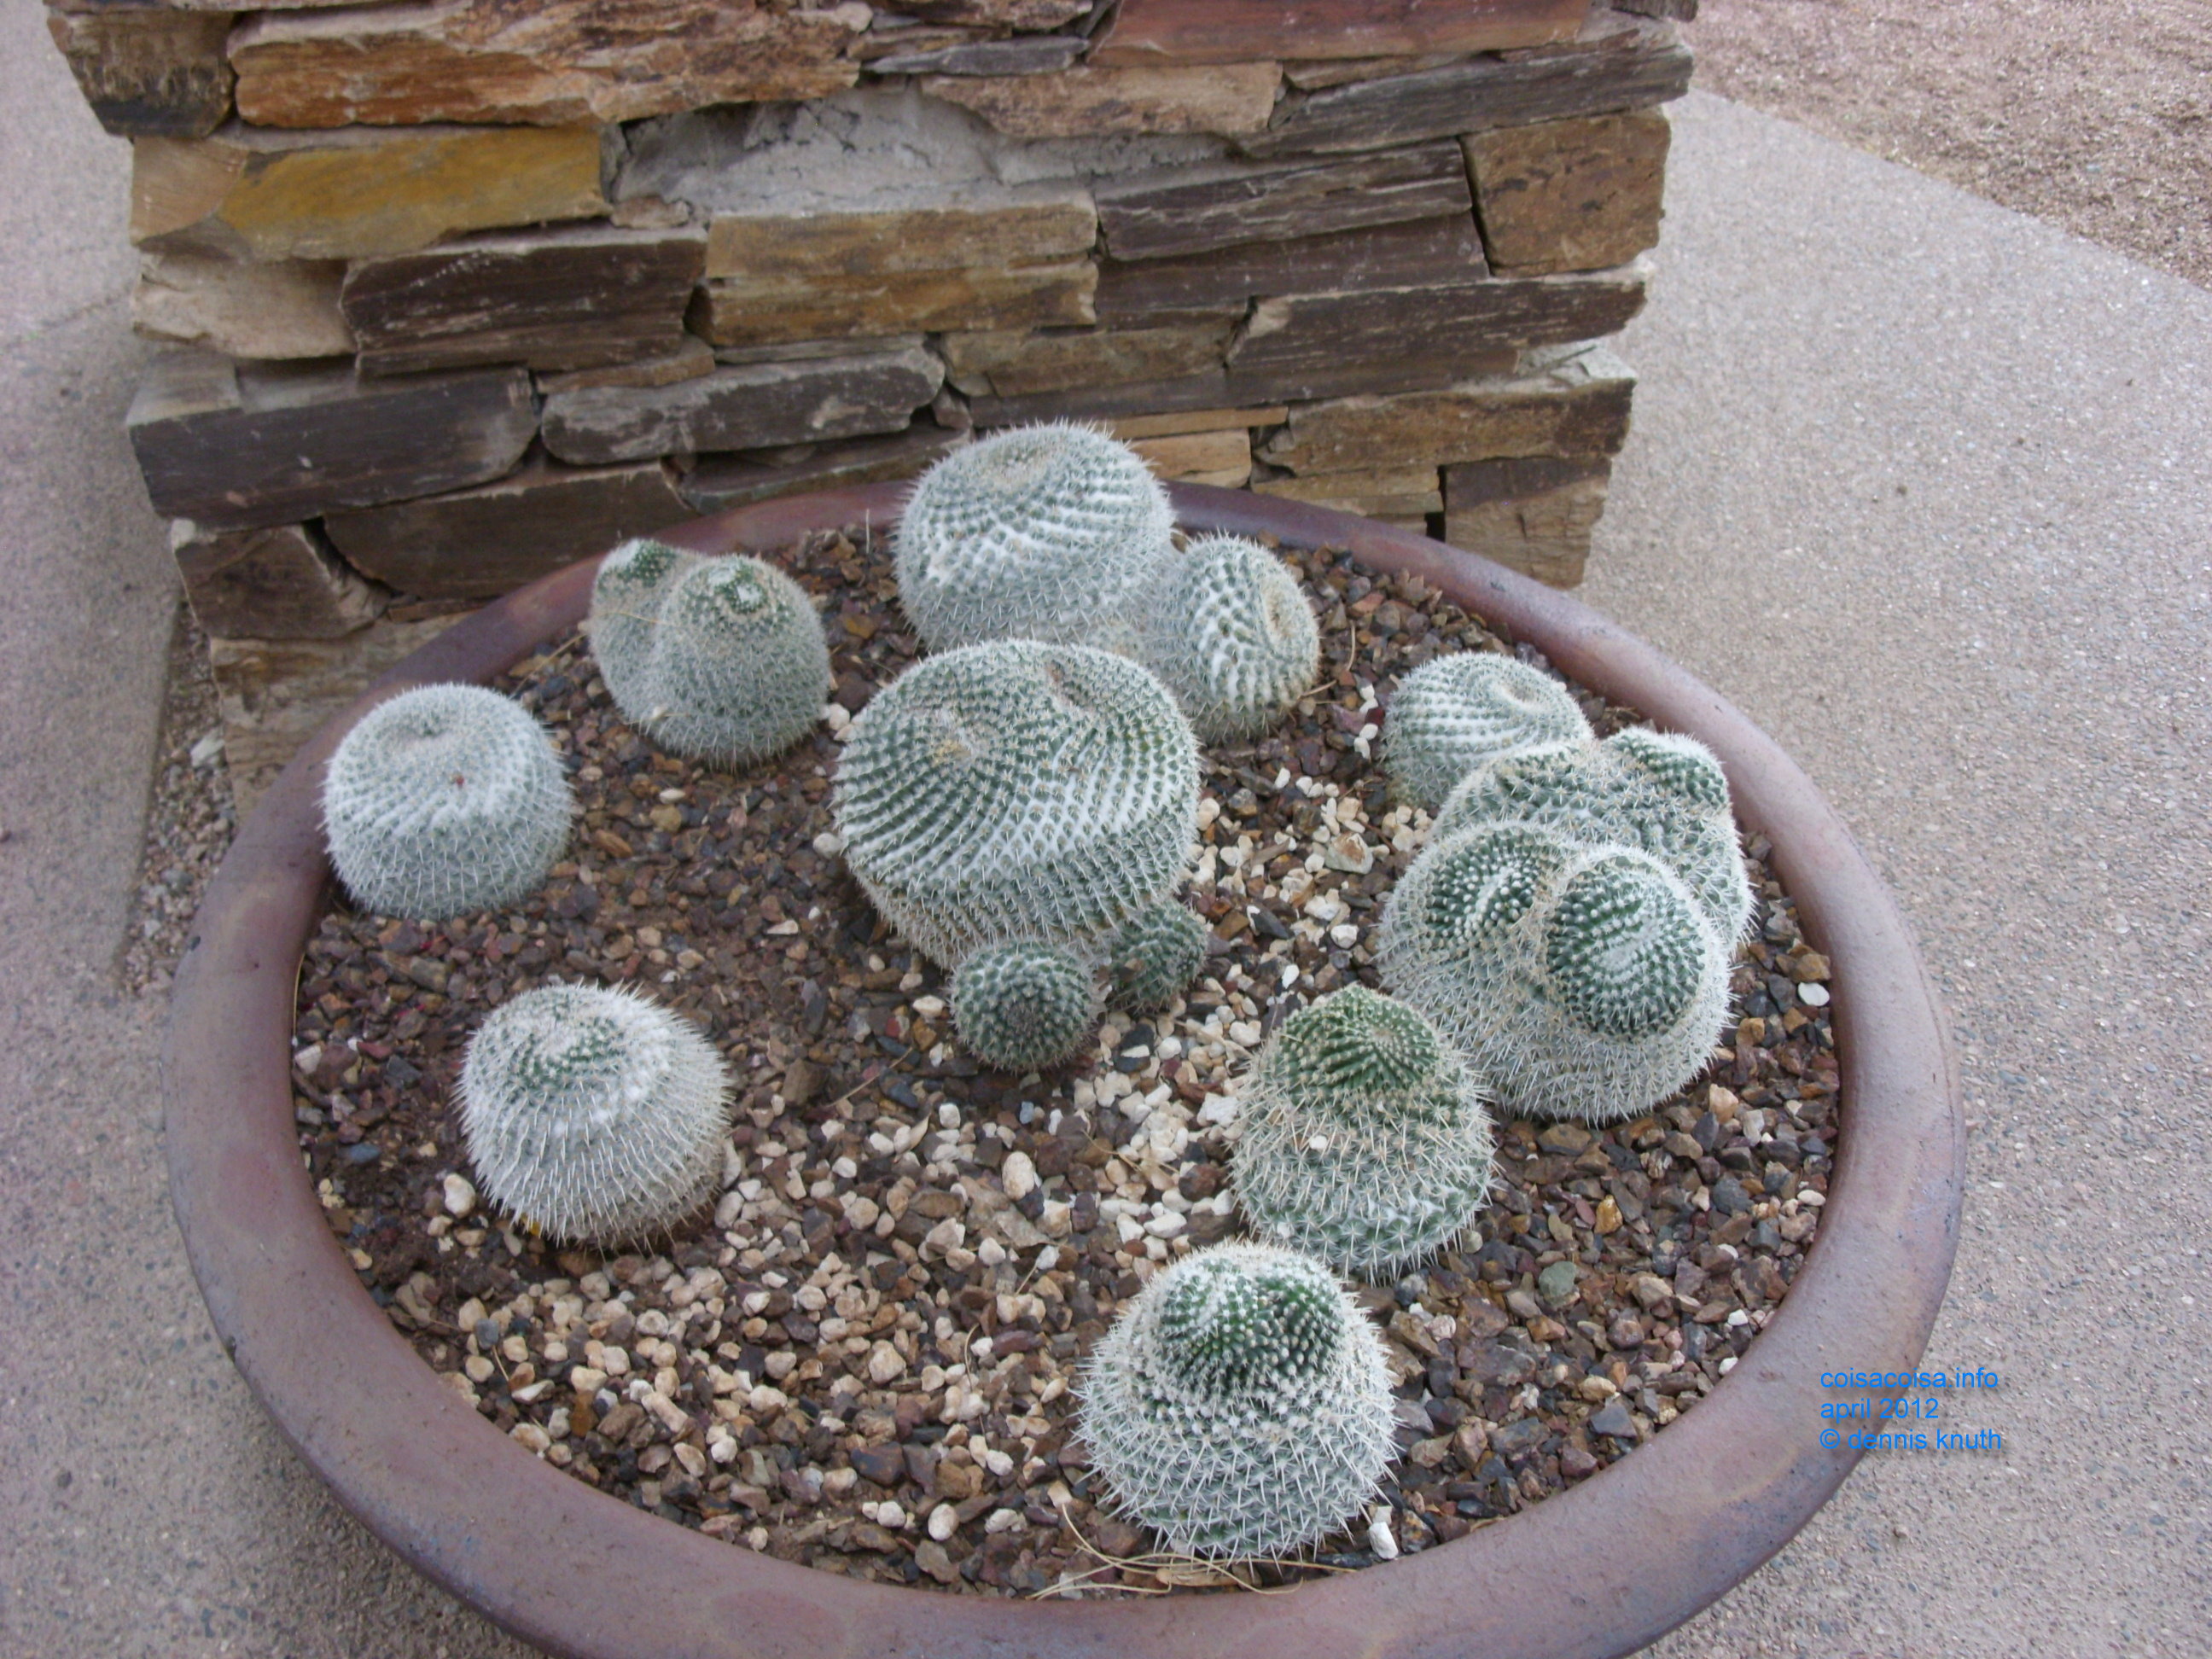 Potted cacti at the Phoenix Botanical Gardens